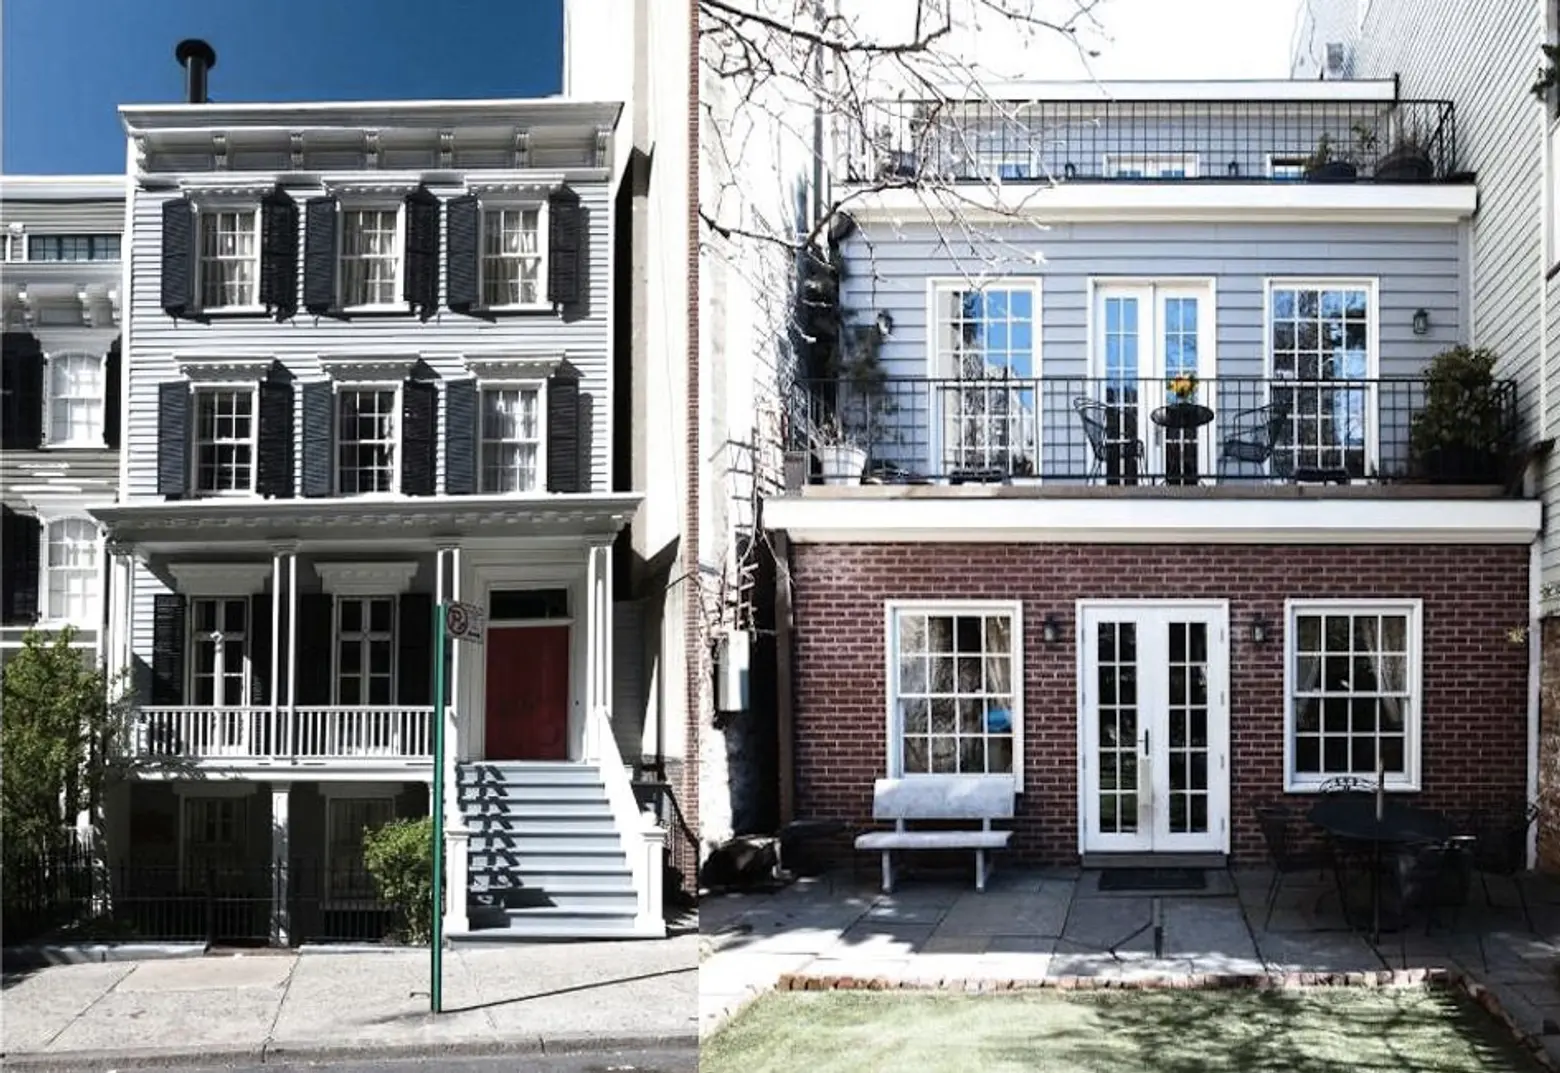 Miraculously Unscathed by Time, This Historic Wooden UES Townhouse Seeks Tenants